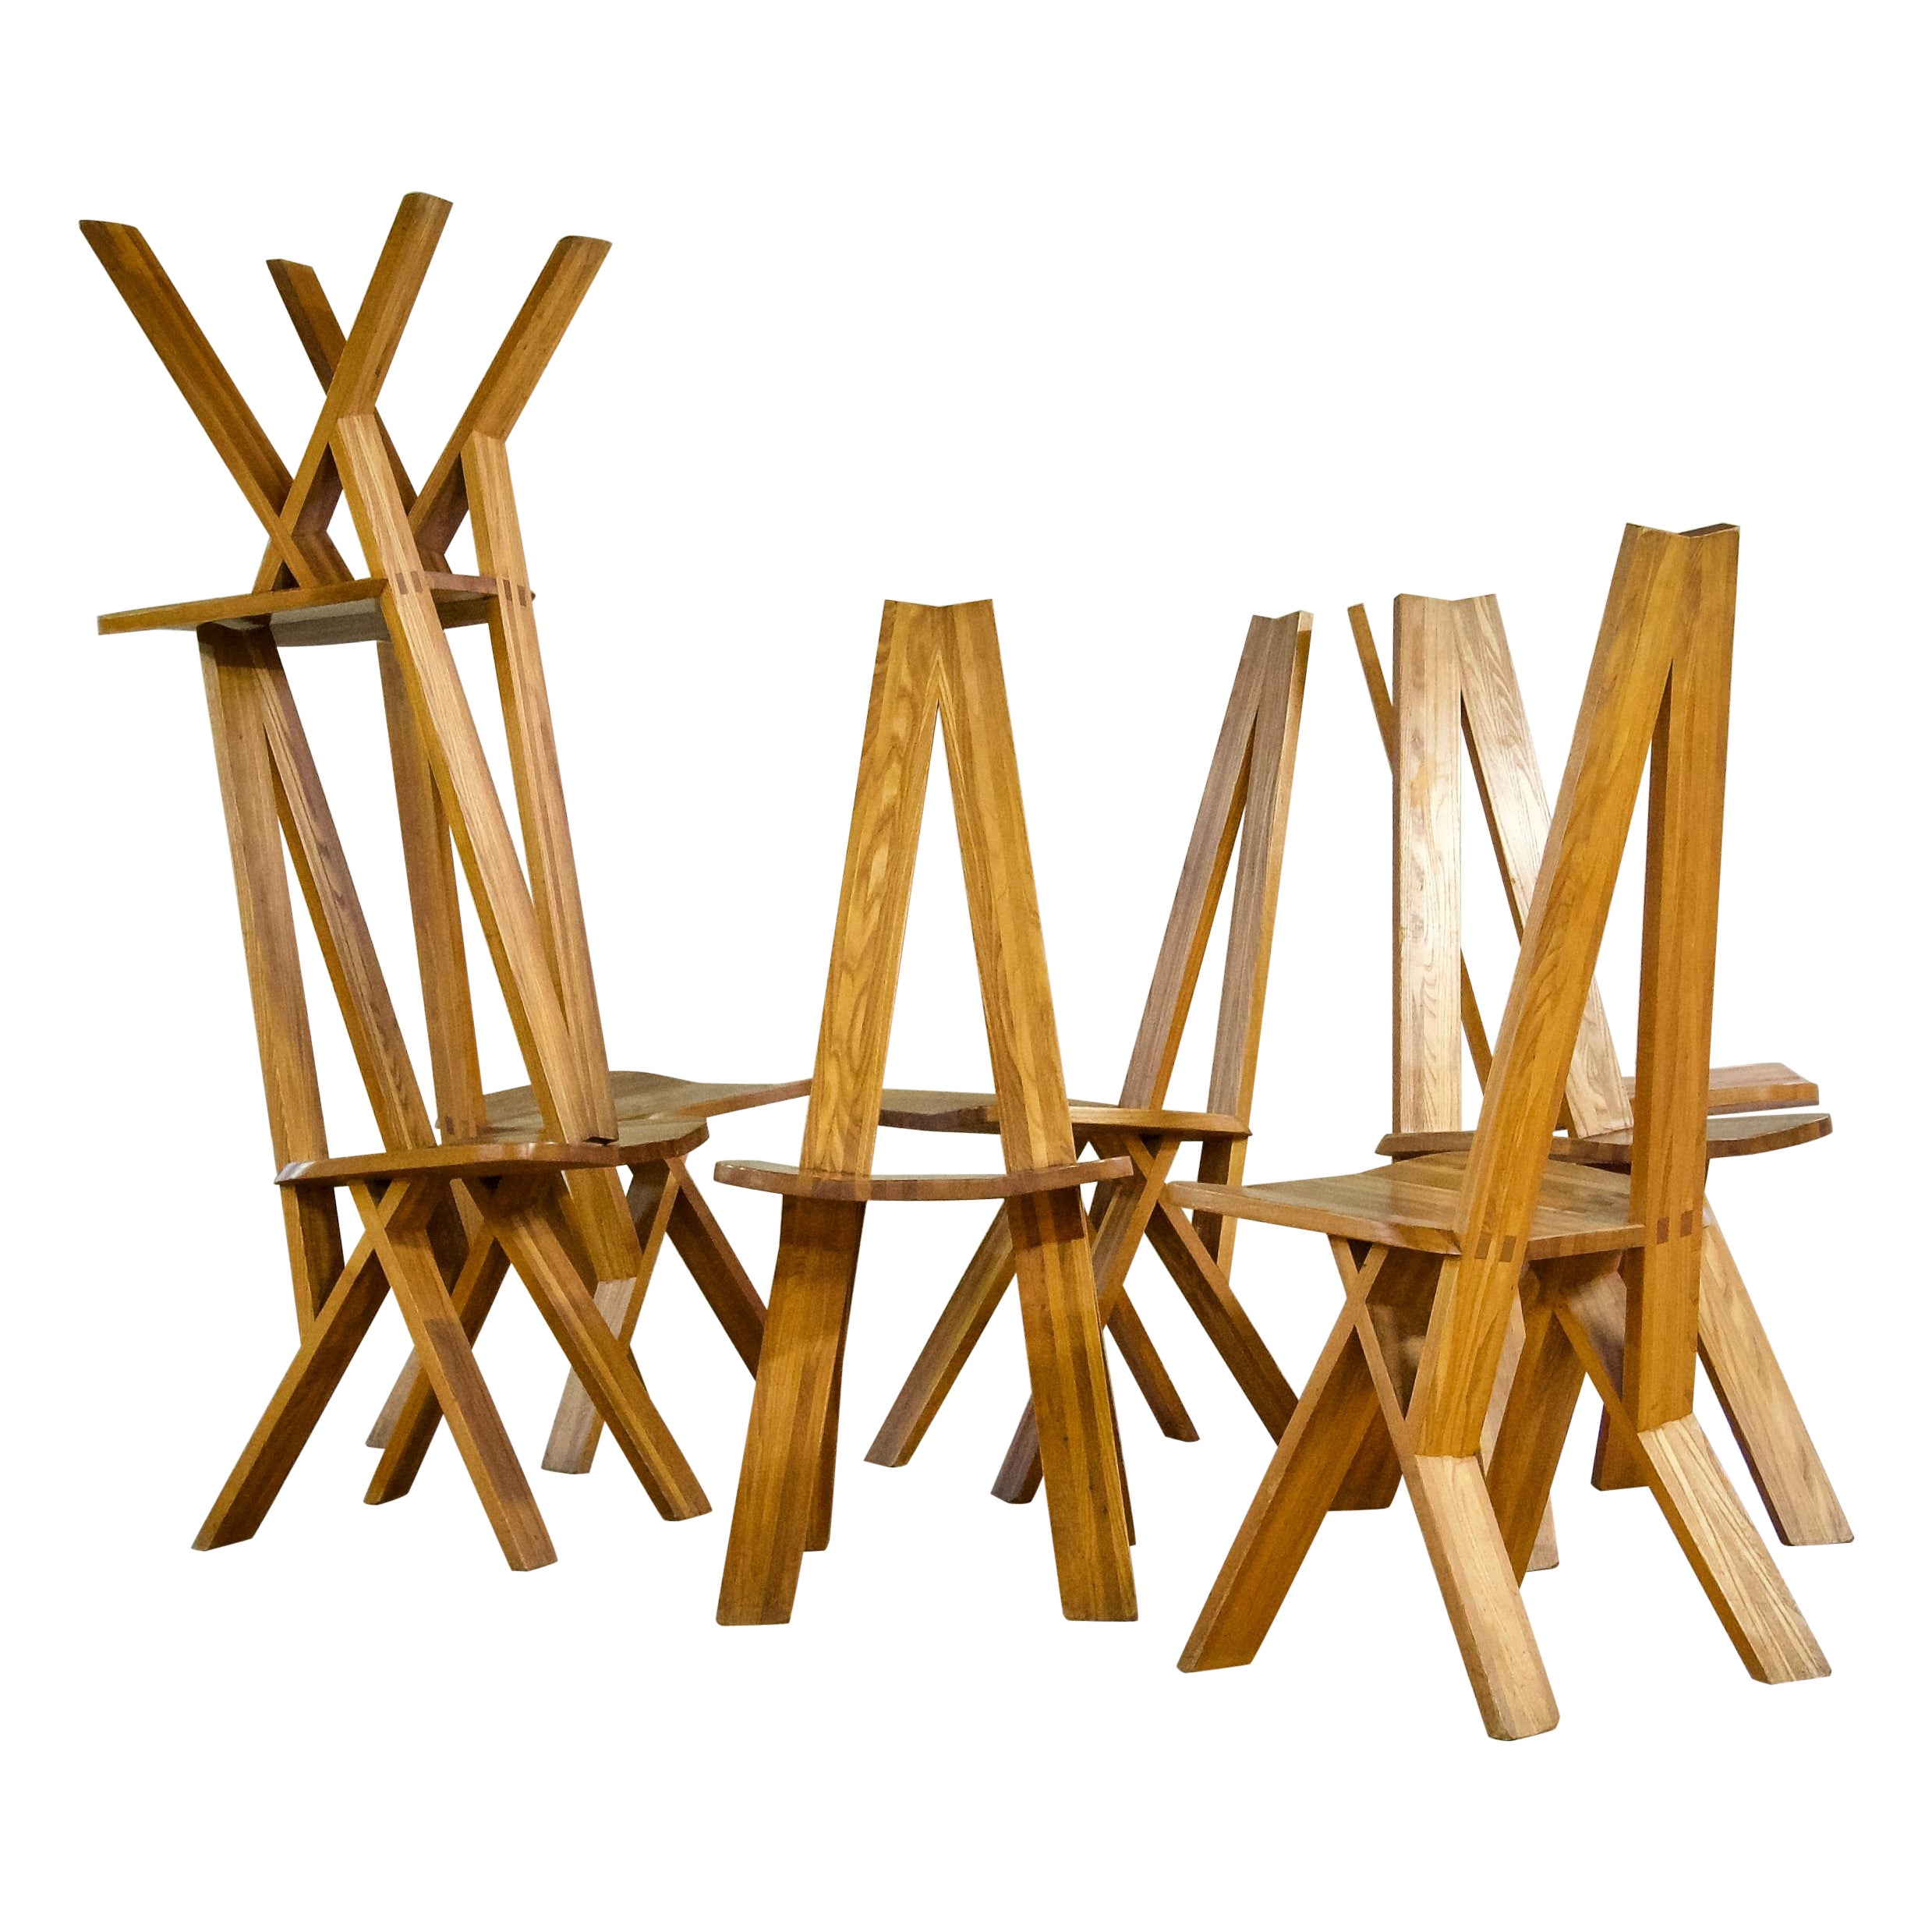 Elm "Chlacc" chairs, S45, Pierre Chapo, France, 1979